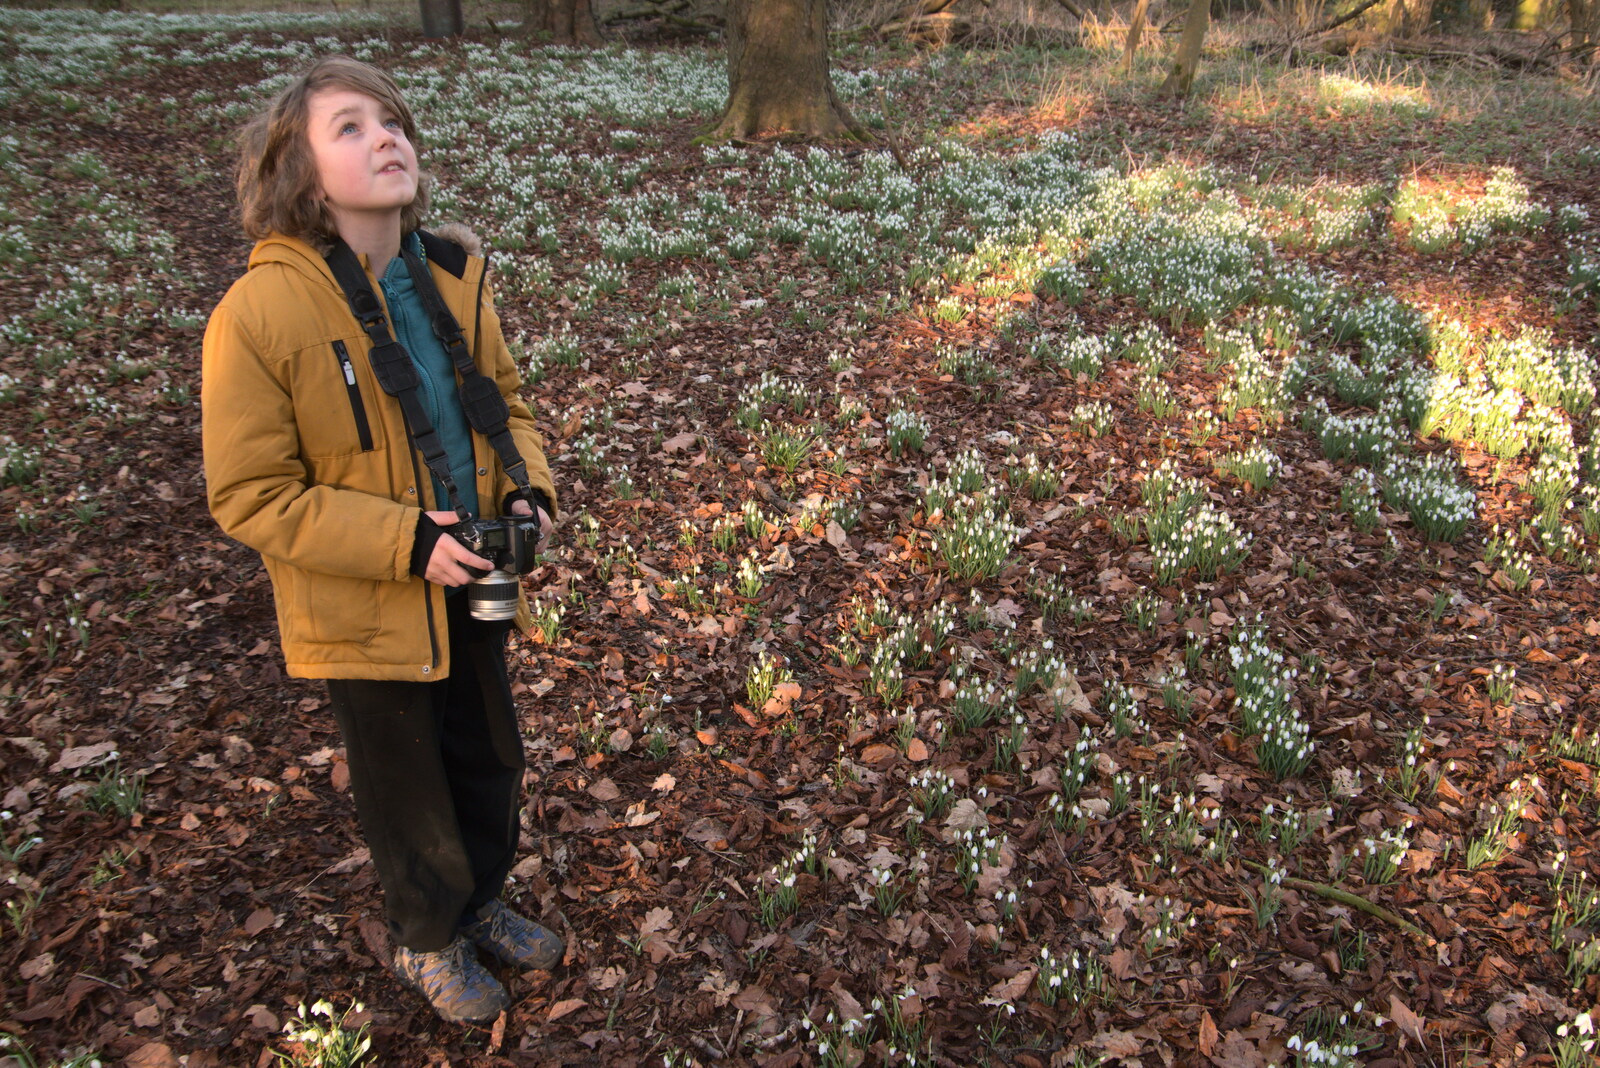 Fred looks around for a photo from Snowdrops at Talconeston Hall, Tacolneston, Norfolk - 7th February 2020